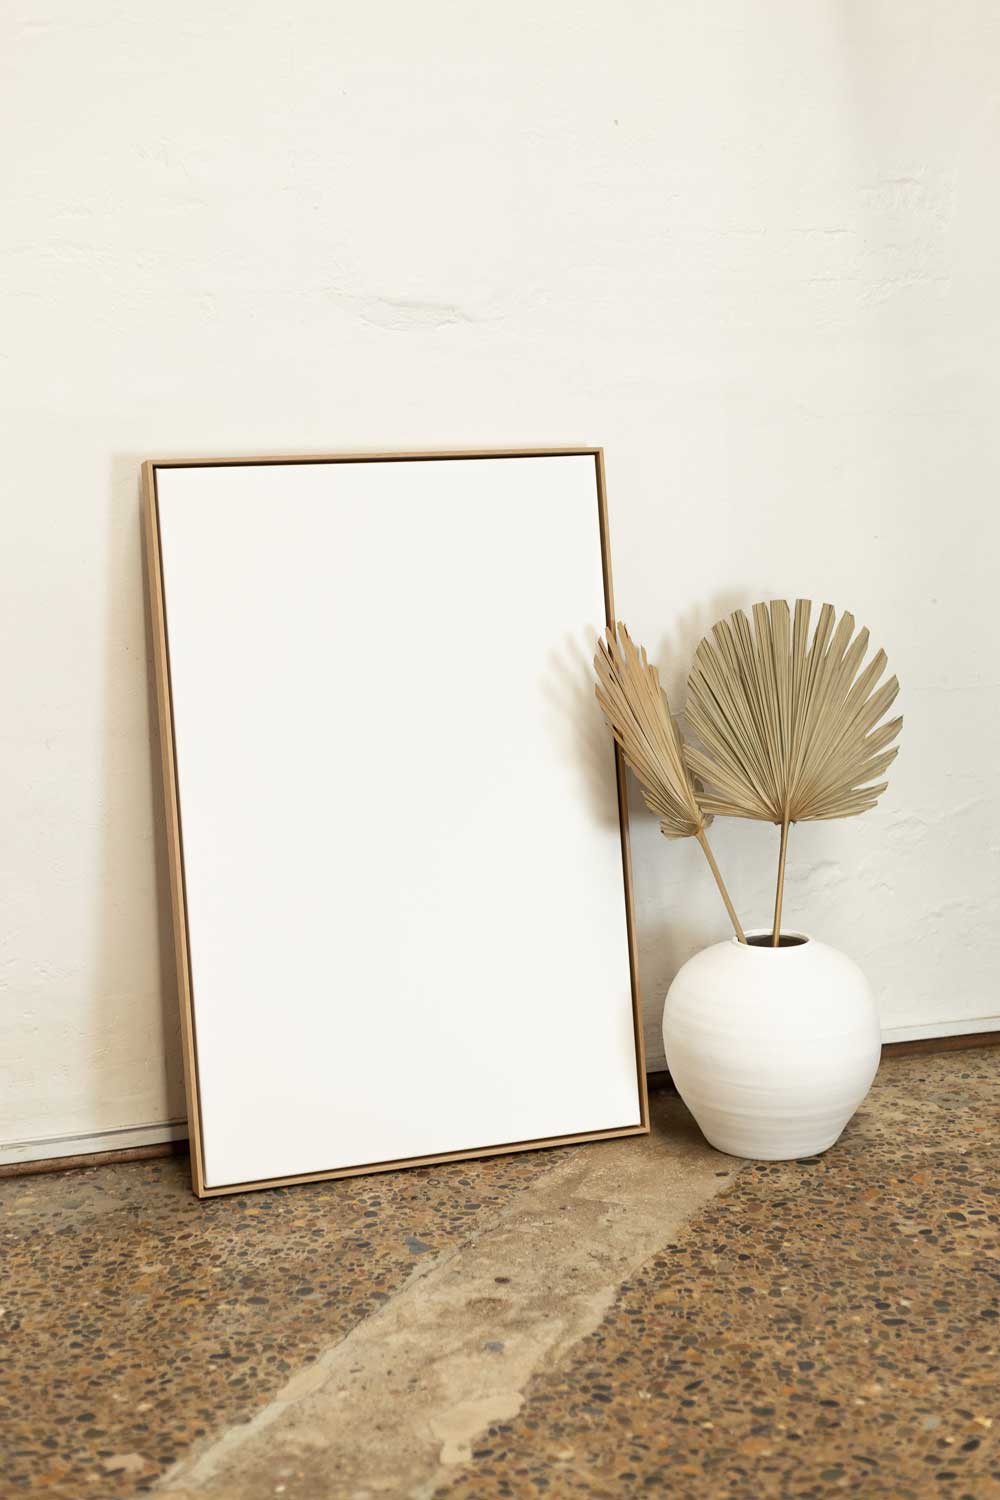  Blank Canvas With Frame